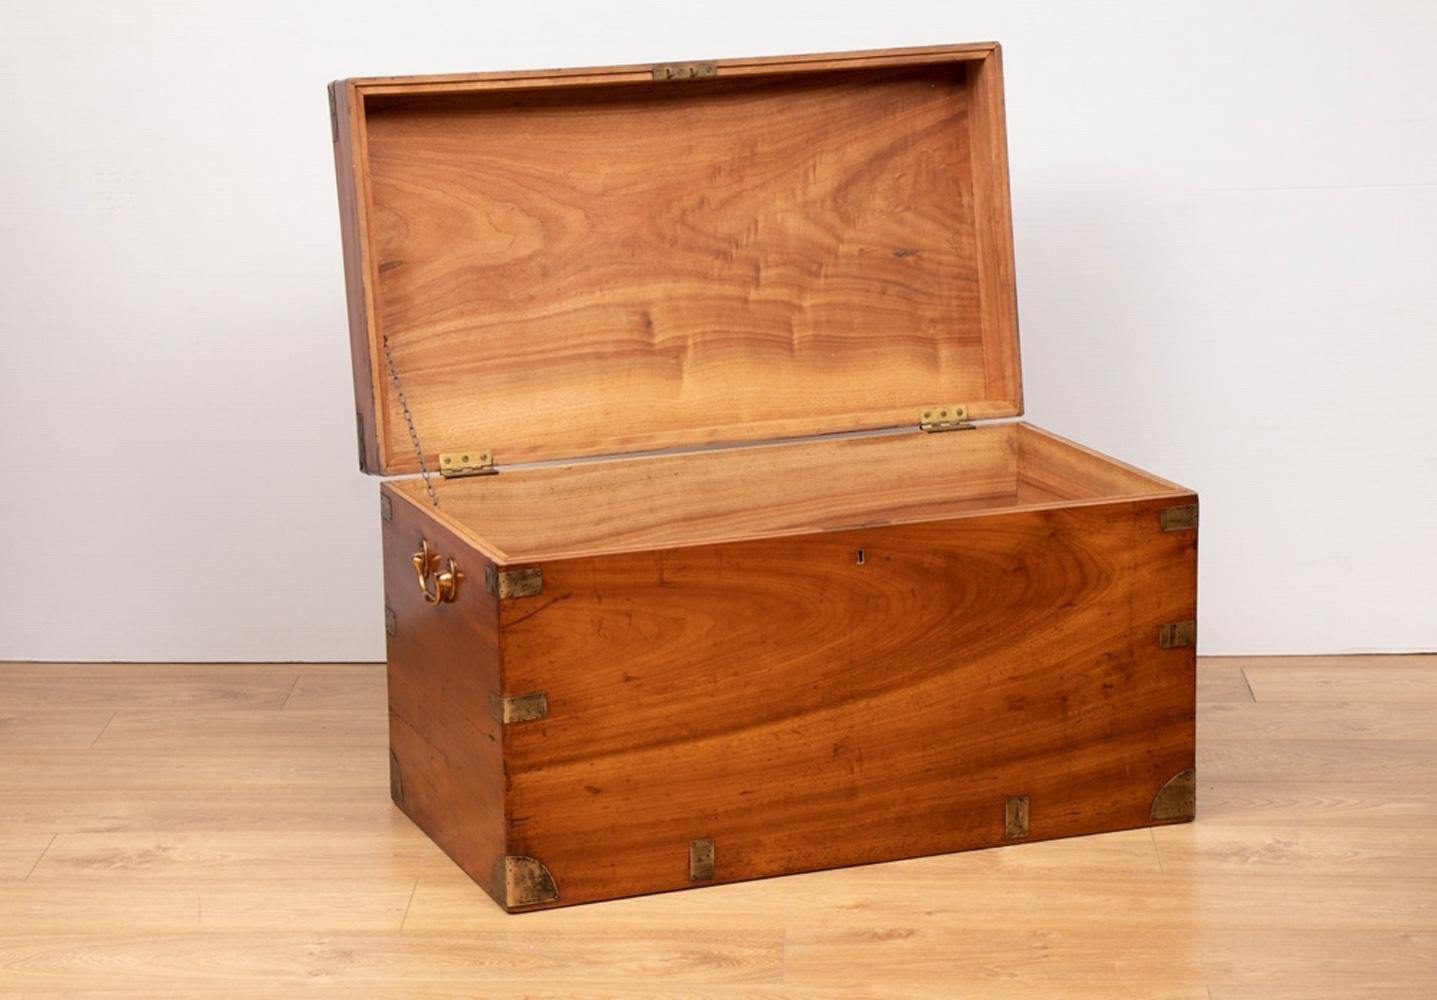 19th century antique military Camphorwood Campaign chest.
A classic example of a stylish and practical chest.